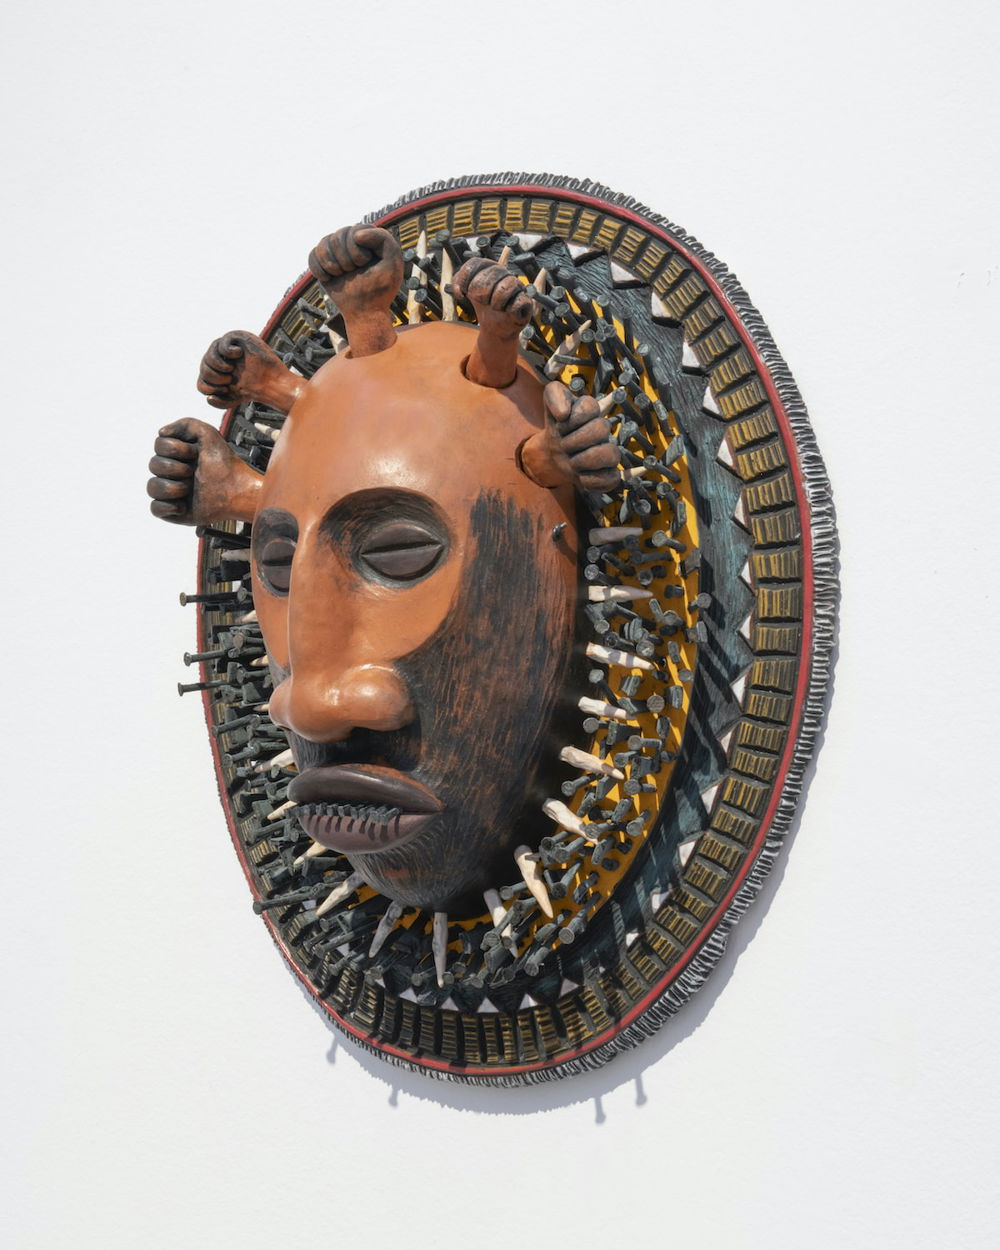 A mixed media mask displayed on a circular wall platform. The mask depicts a stylized face and is a terra cotta color with black accents around the lower half of the face and closed eyes. Five miniature fists crown the top of the head like small tufts of hair. The circular platform is ornately patterned with geometric shaped pieces of mixed media materials such as ceramic and metal pieces.